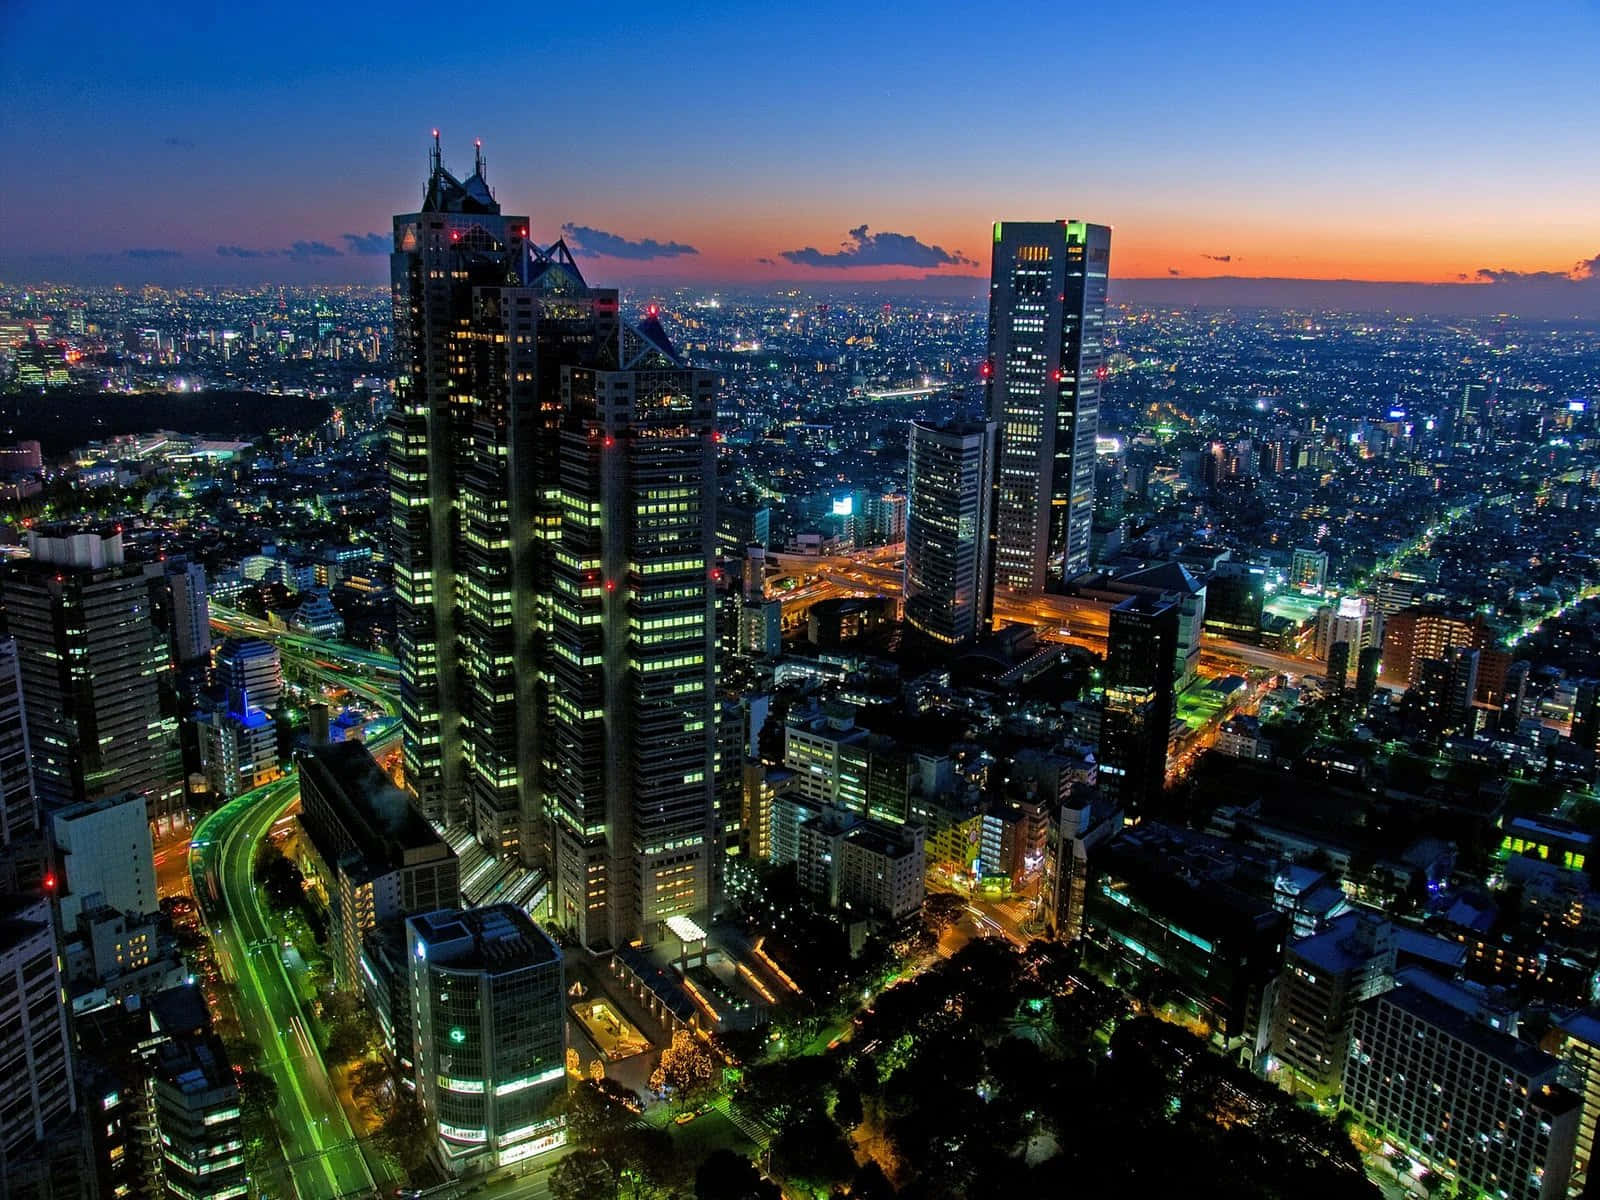 Take In the Beauty of Tokyo at Night